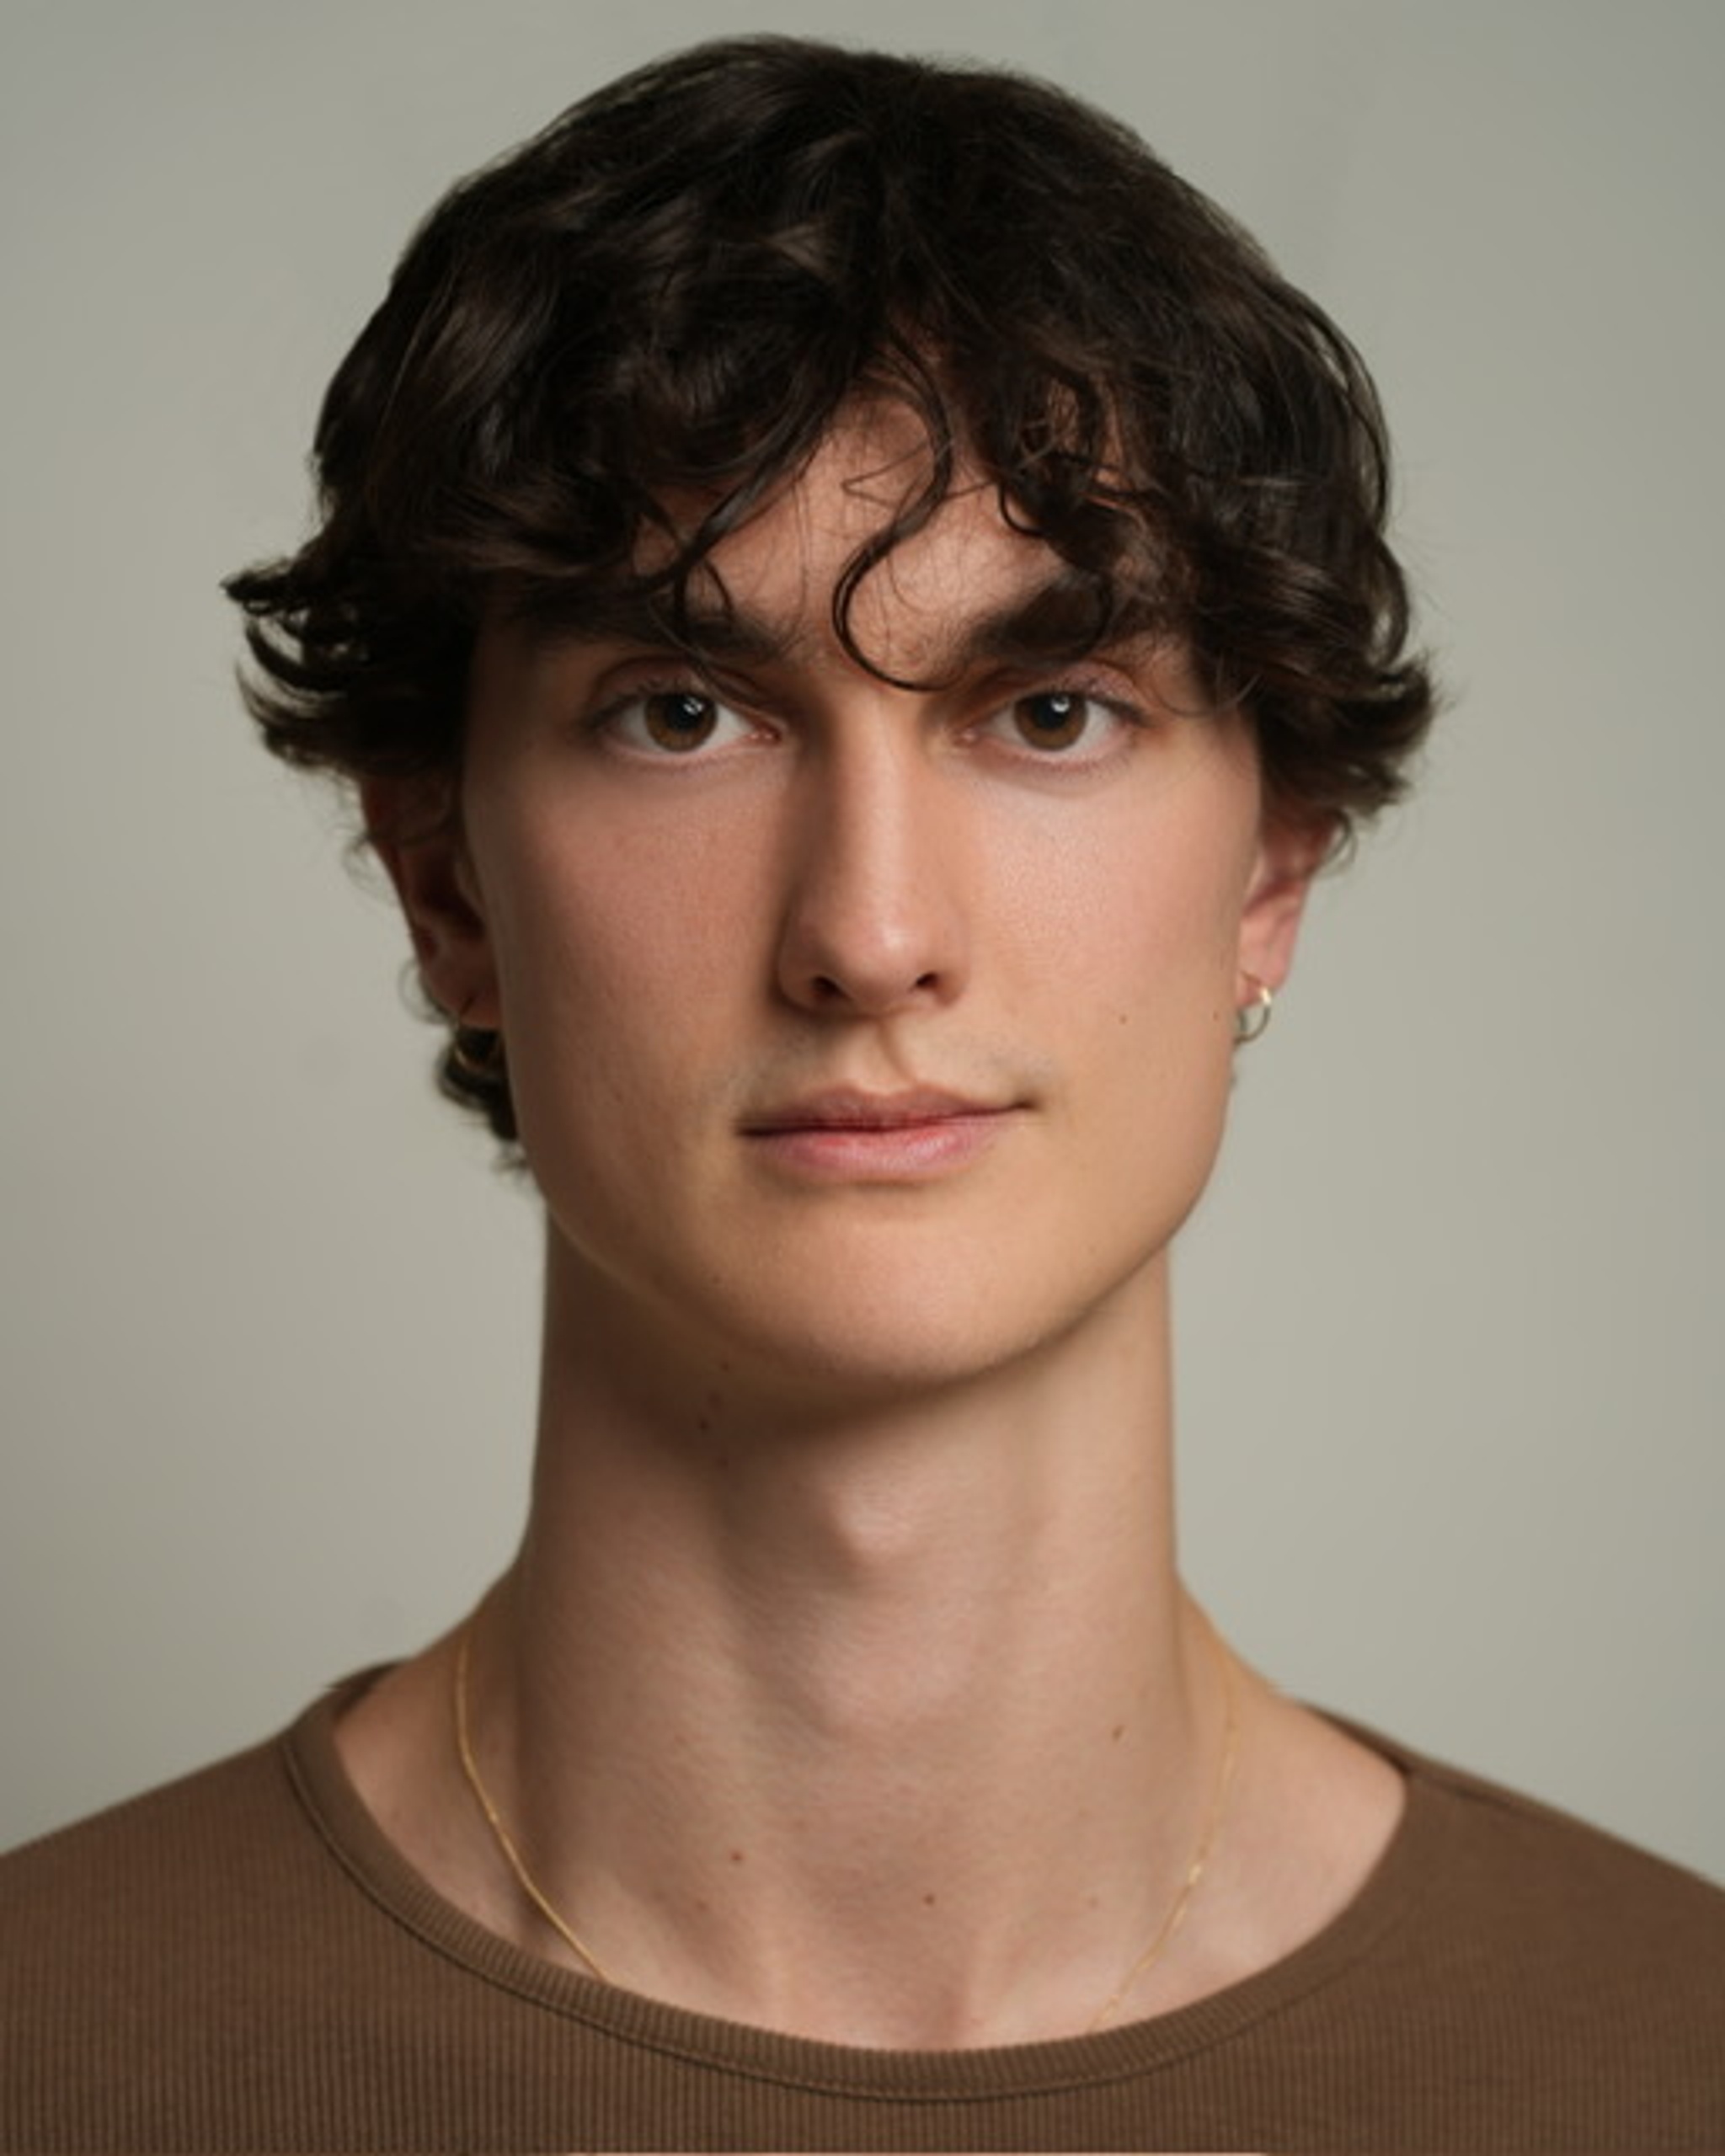 A headshot of dancer Thomas Hogan, a white man seen from the shoulders up. He has brown hair swept over his forehead and smiles slightly with one side of his mouth.